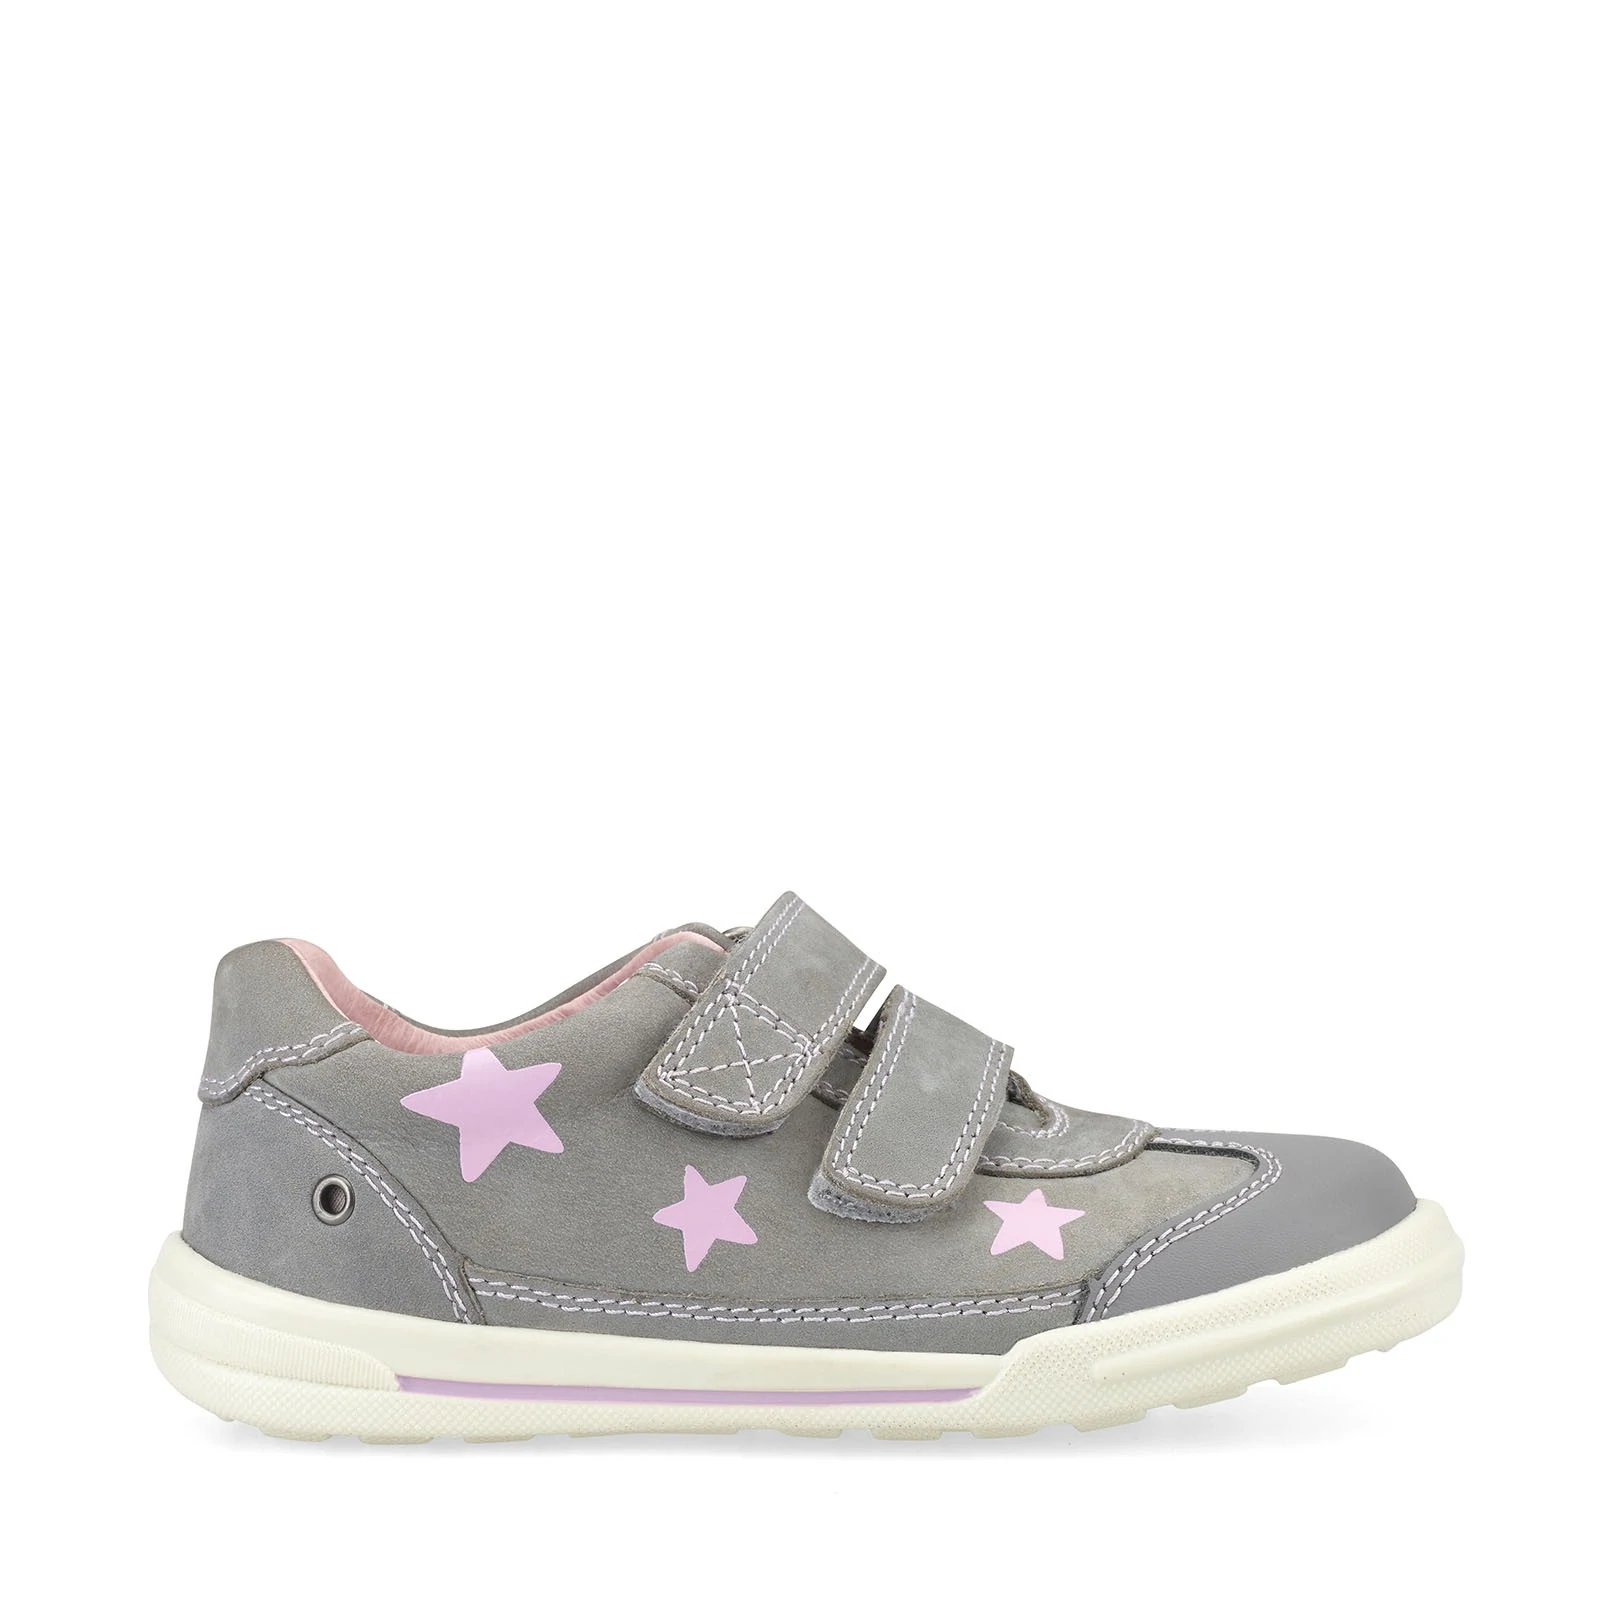 sneakers with stars on them